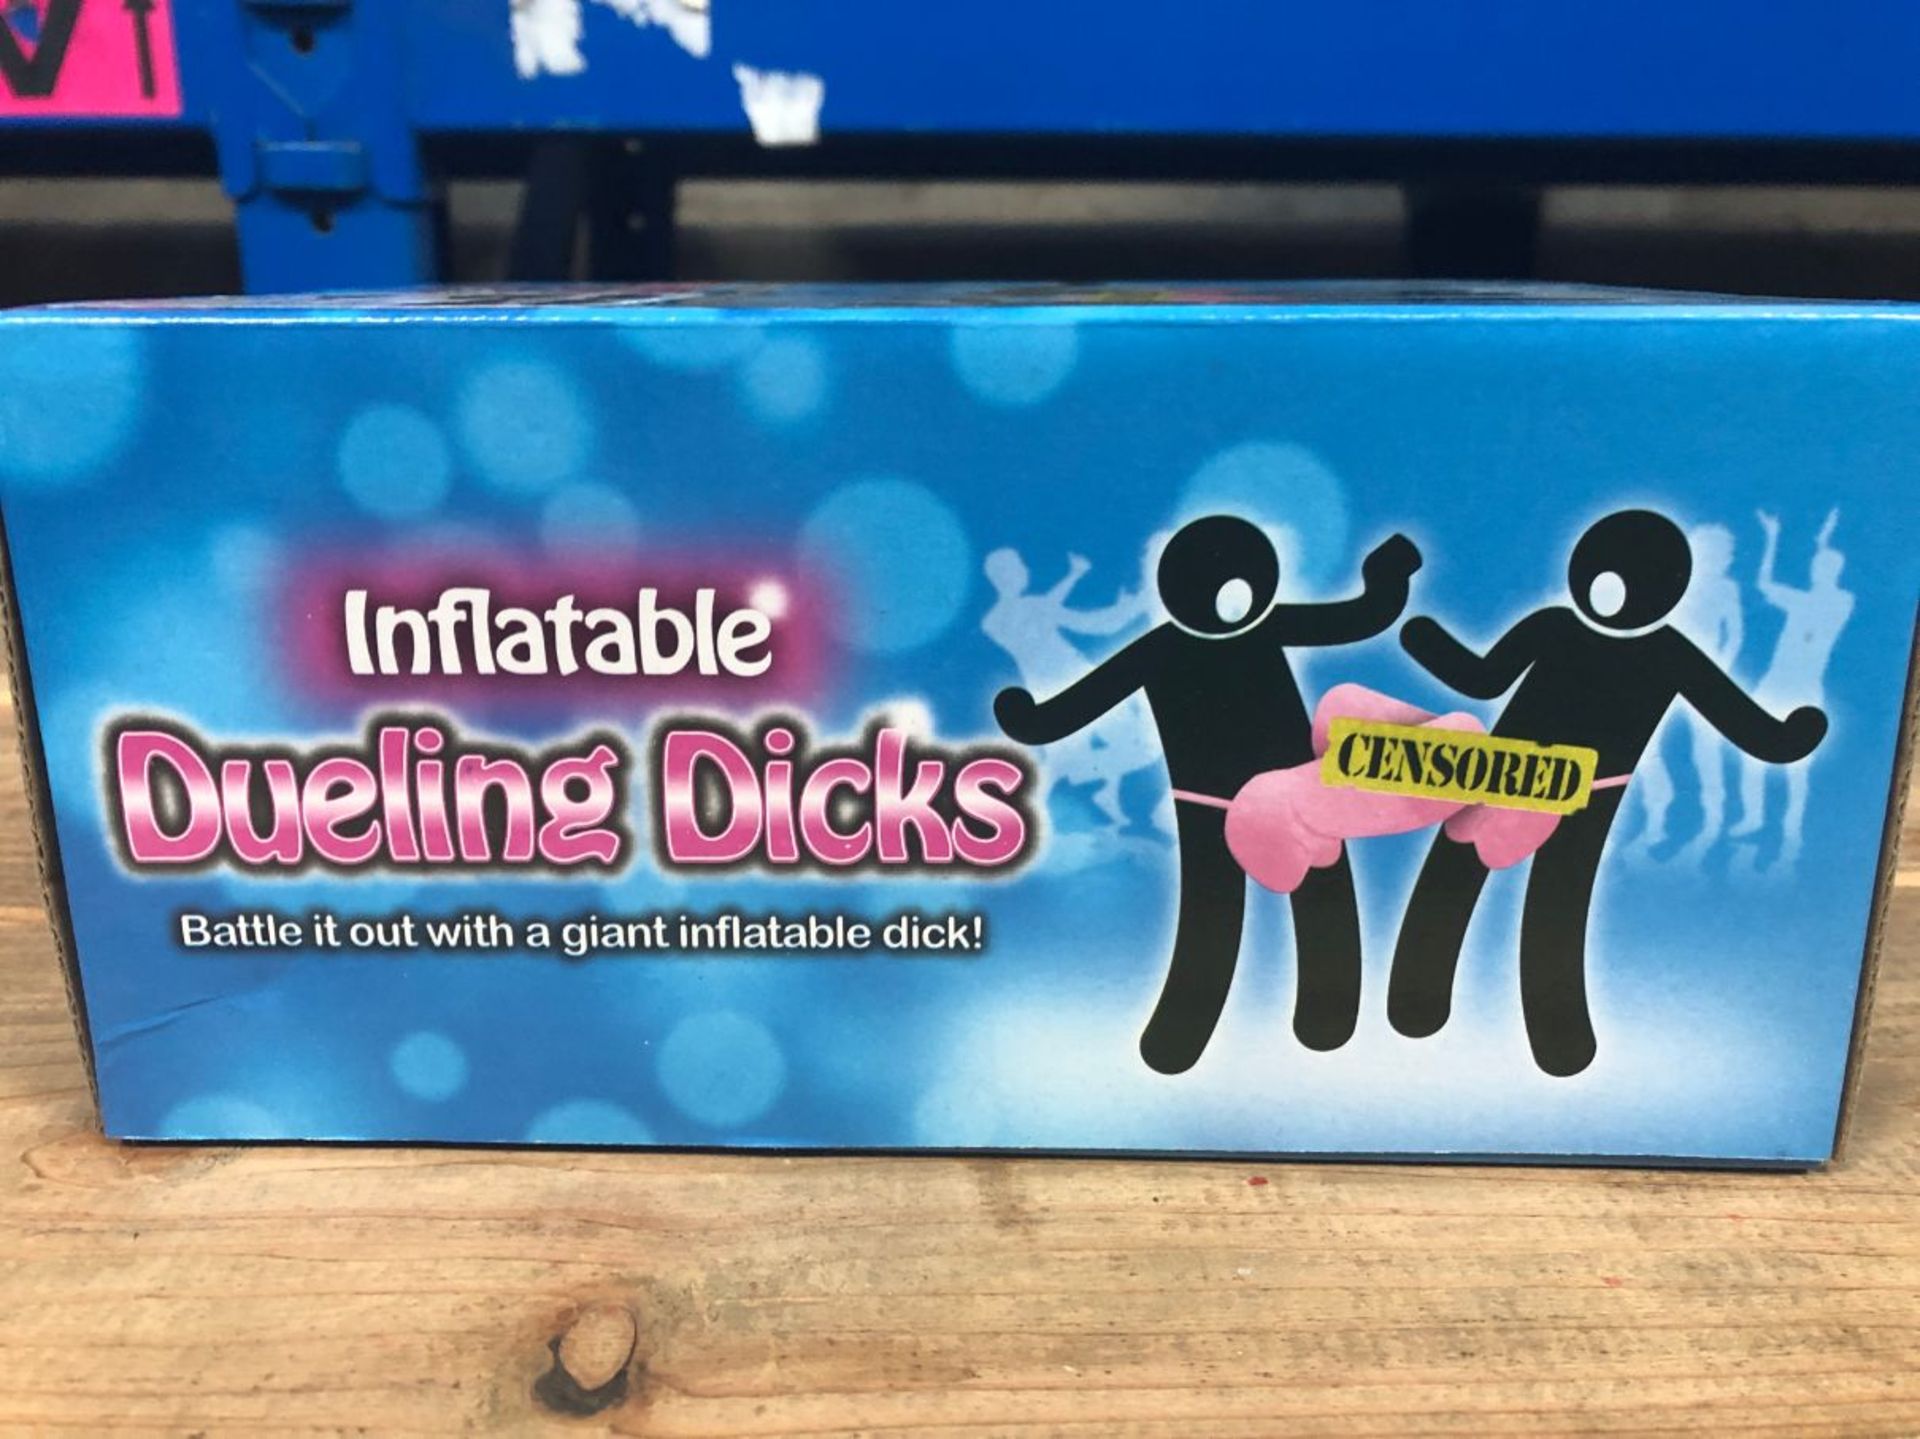 2 X SETS OF INFLATBLE DUELING DICKS / COMBINED RRP £24.00 / UNTESTED CUSTOMER RETURNS